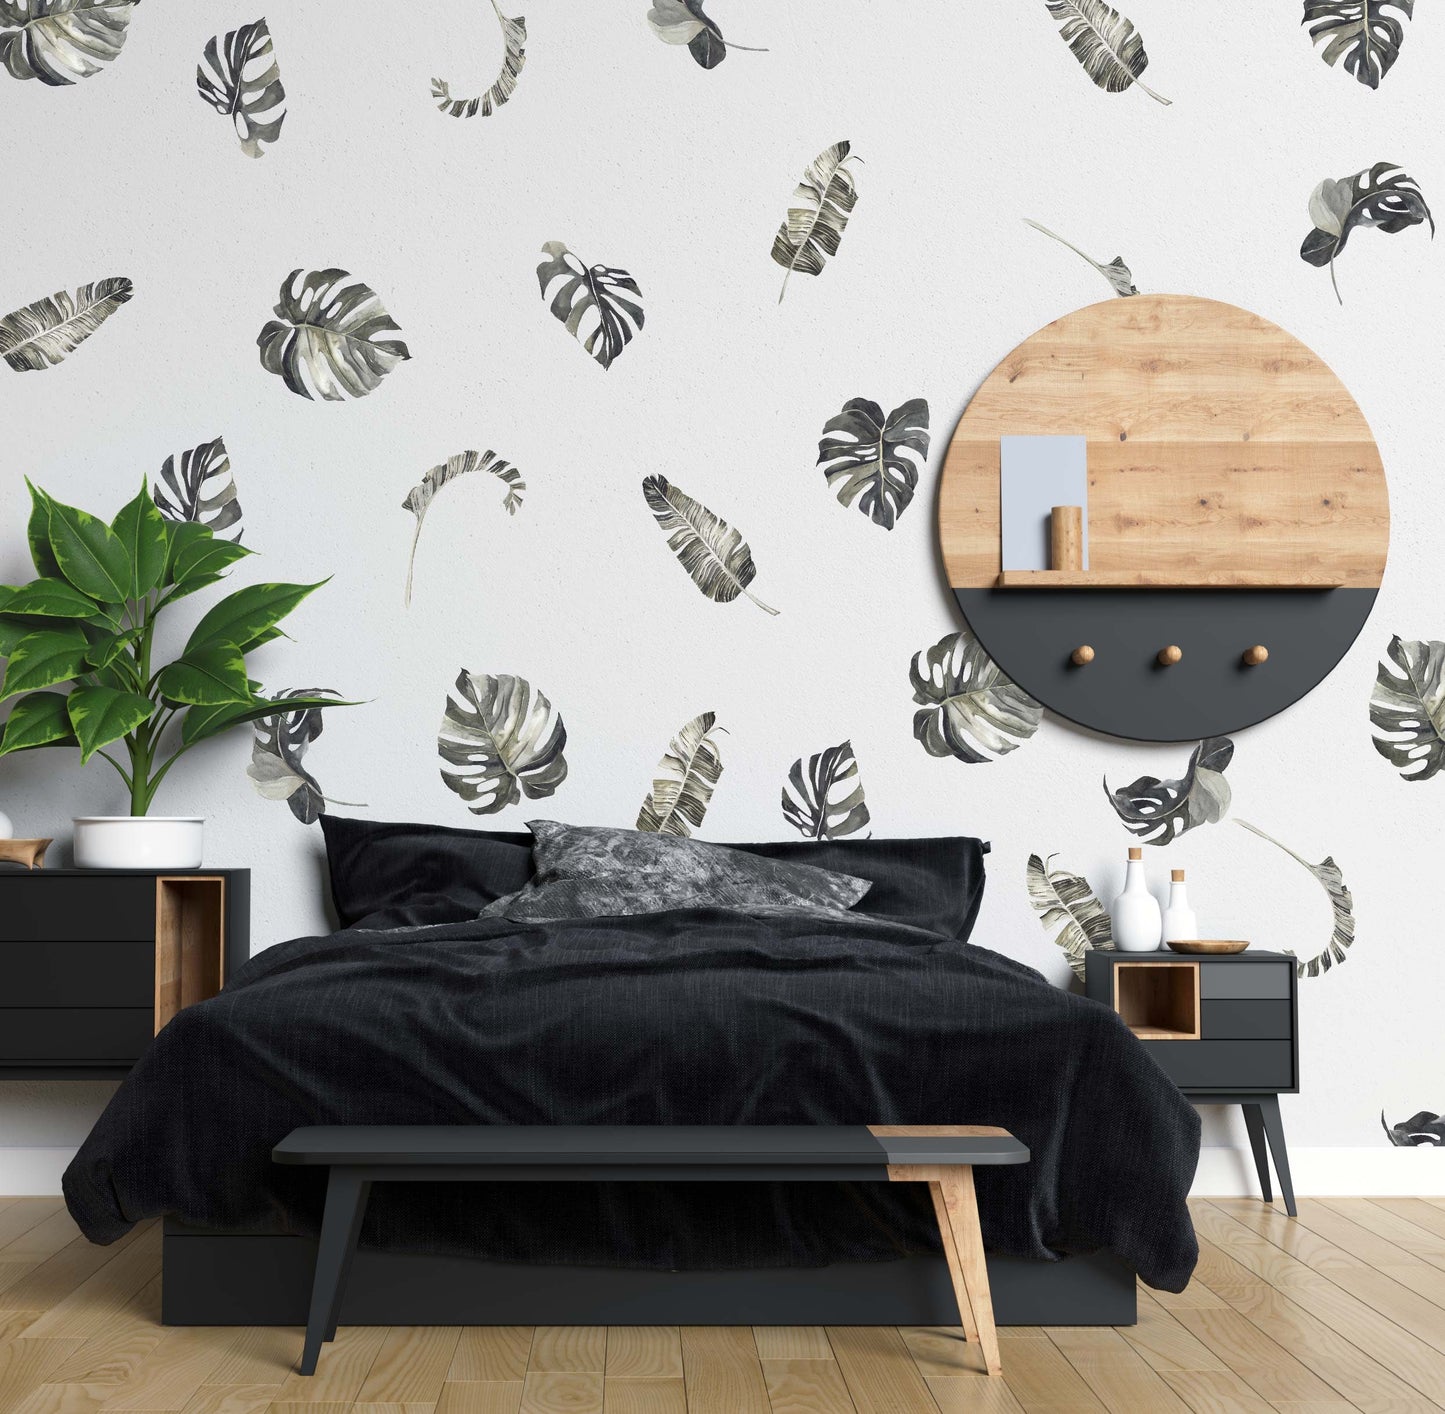 Palm Leaves Wall Decals Banana Greenery Tropical Sticker, LF155